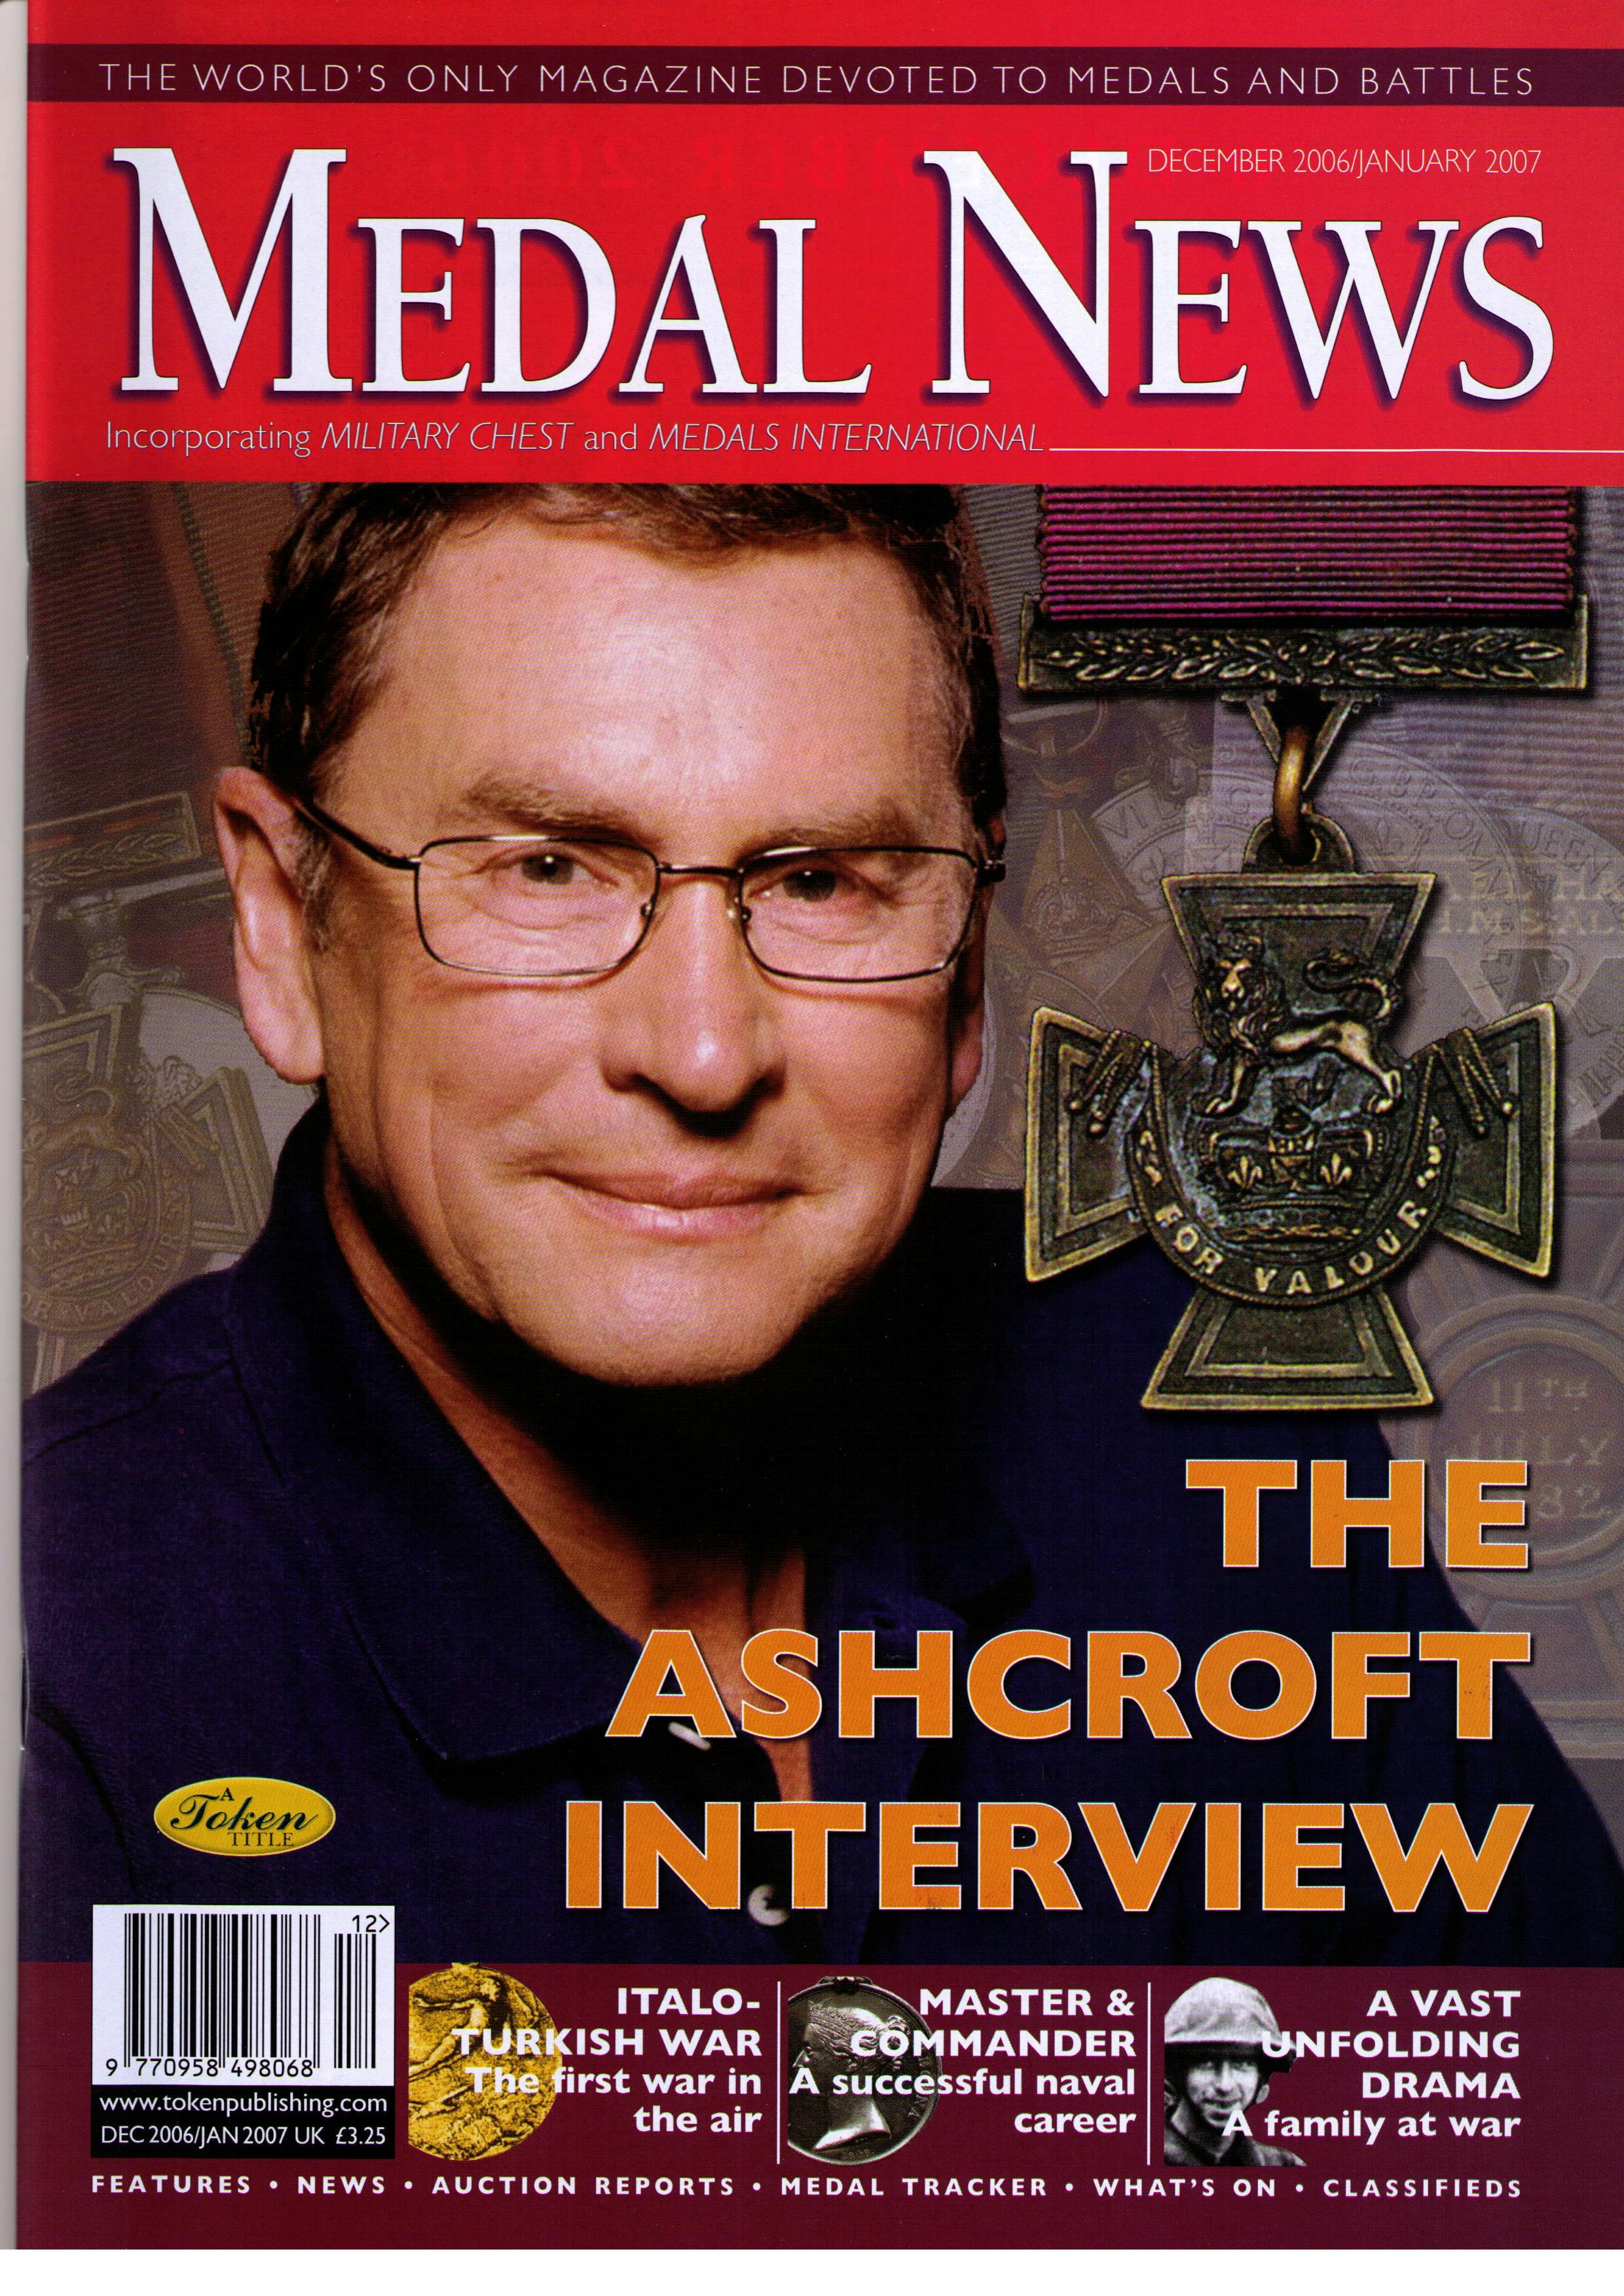 Front cover of 'Helping History', Medal News December 2006, Volume 45, Number 1 by Token Publishing